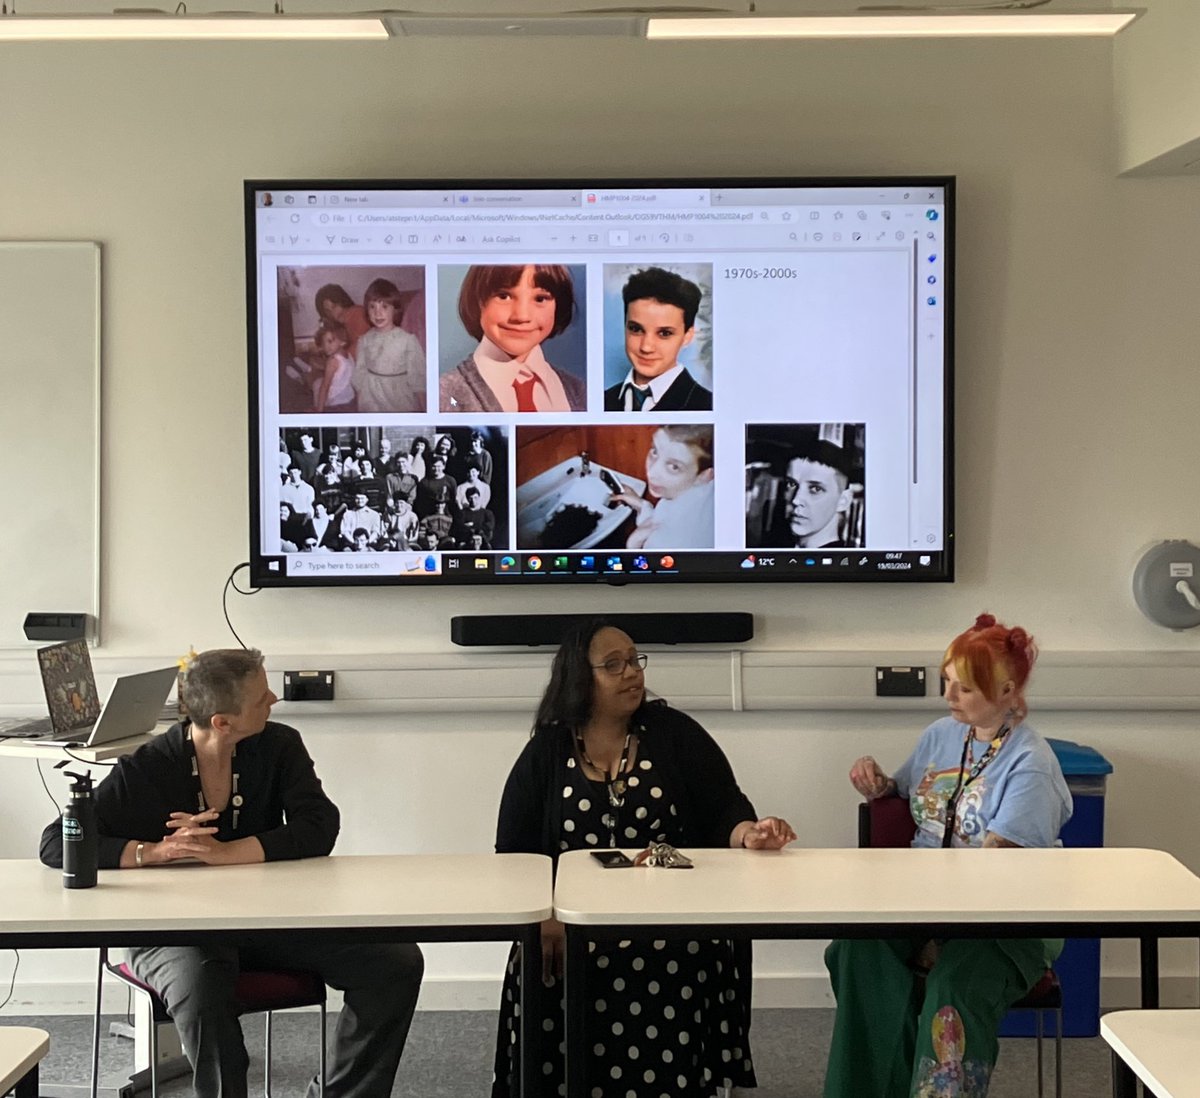 This week, our 1st year @UONHMPSS students had the honour of hearing our special panel on hair and identity chaired by @ATStepniak and featuring @LEJowett @EvelynMulinge & Allyson Green who all spoke about what their hair means to them and their identity #UON